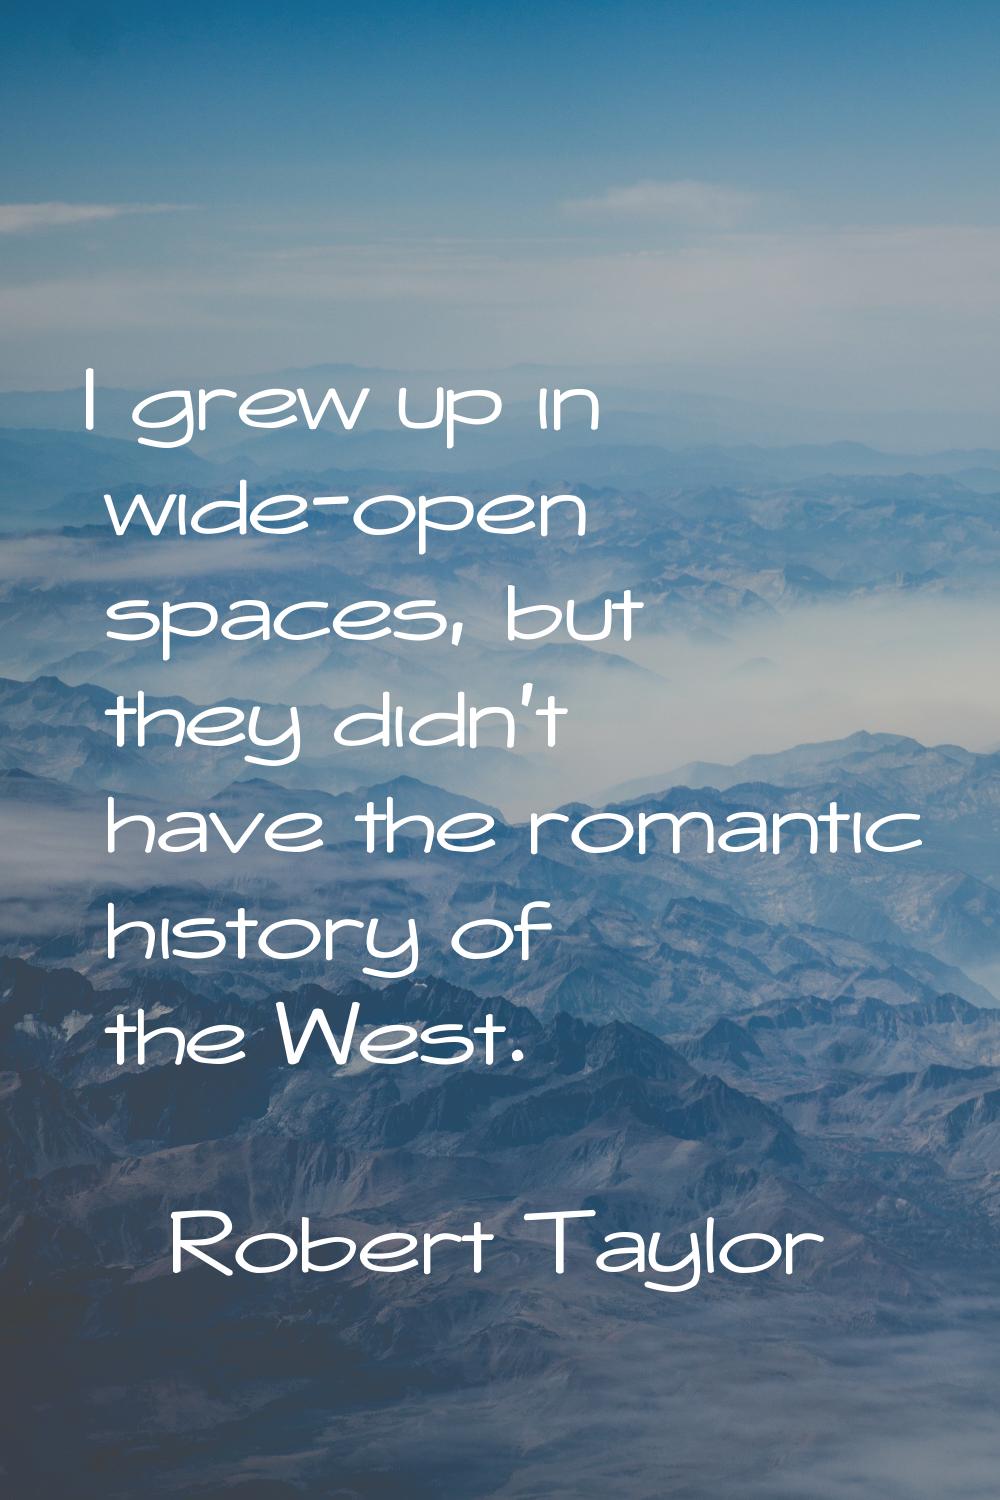 I grew up in wide-open spaces, but they didn't have the romantic history of the West.